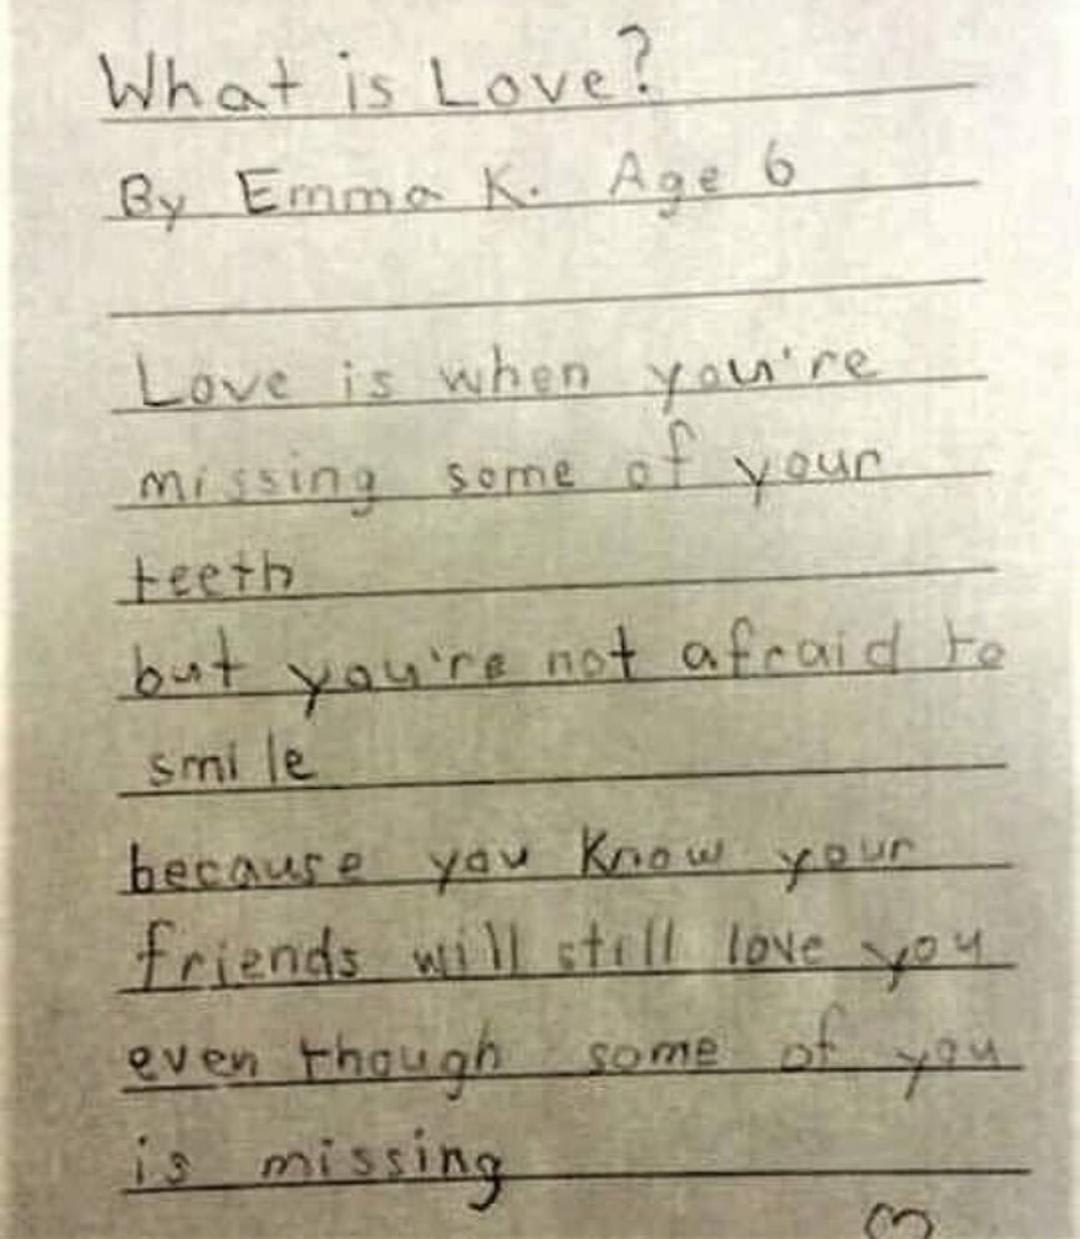 What is Love by a 6 yr old